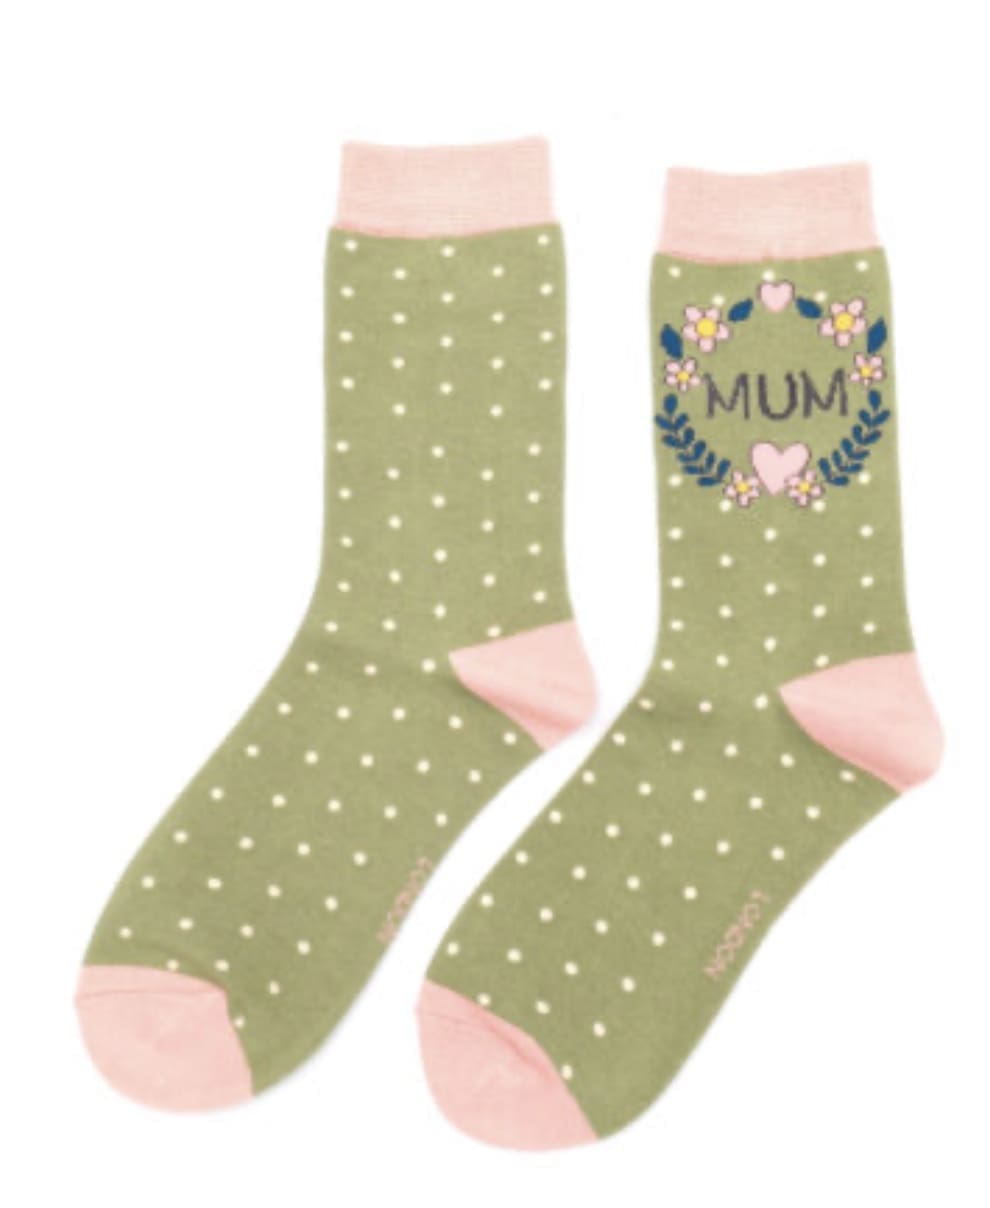 A pair of green socks with polka dots and the word mum.